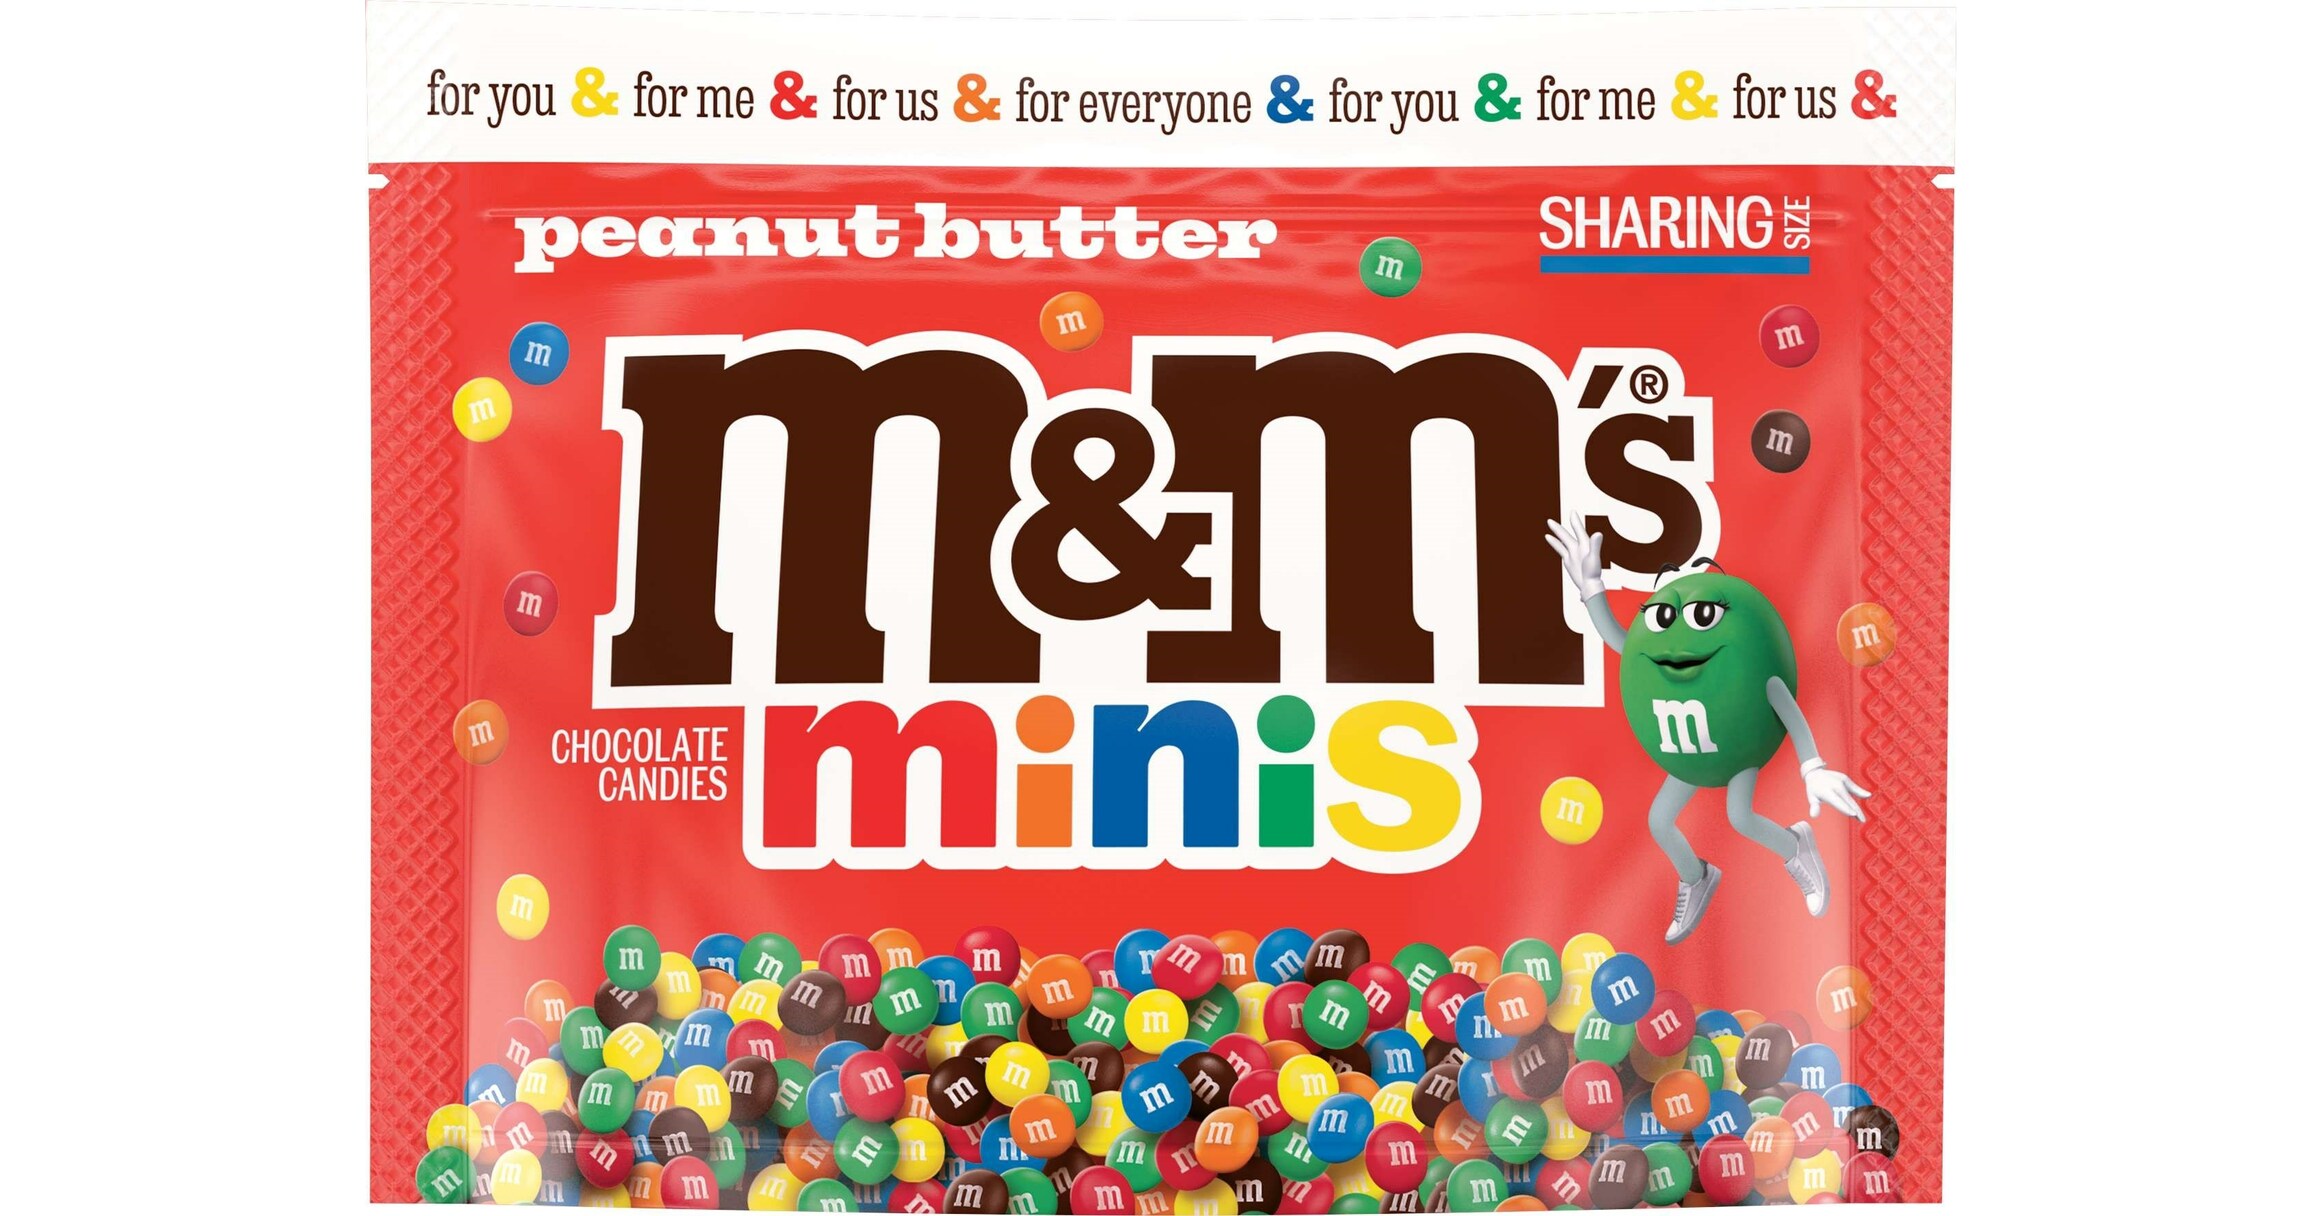 Have you tried these new peanut butter M&M's minis? They're so